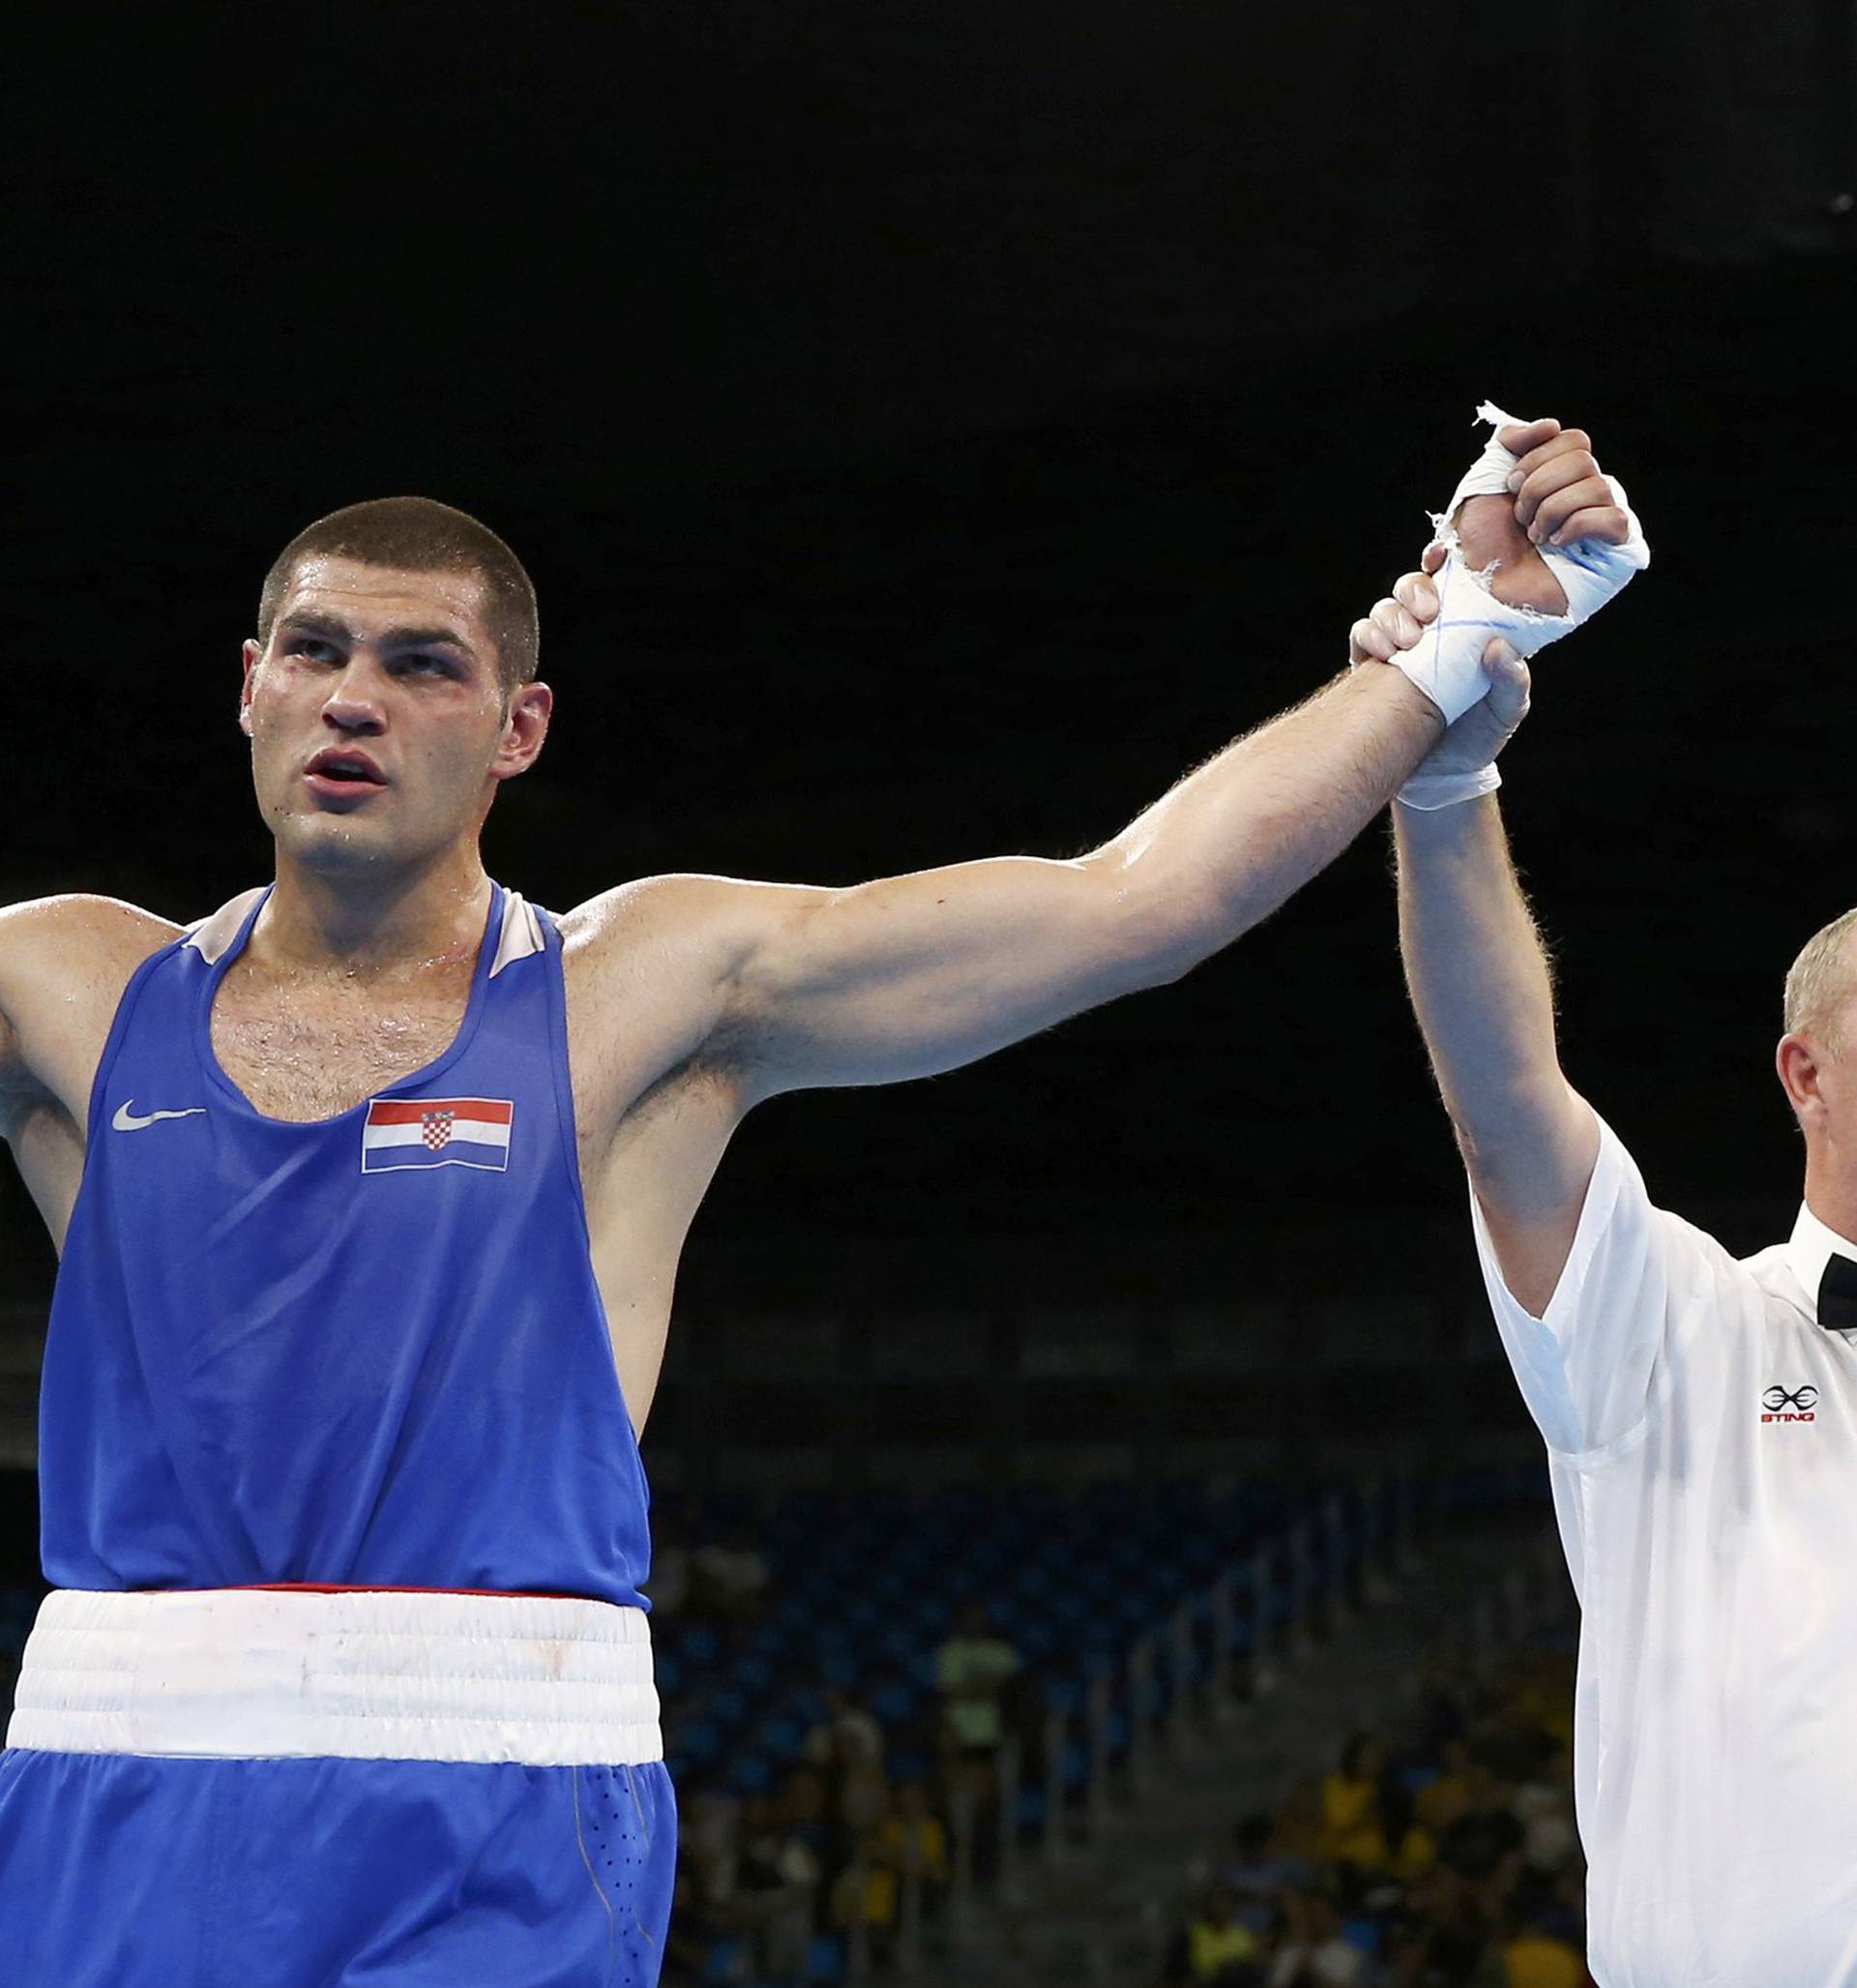 Boxing - Men's Super Heavy (+91kg) Round of 16 Bout 162